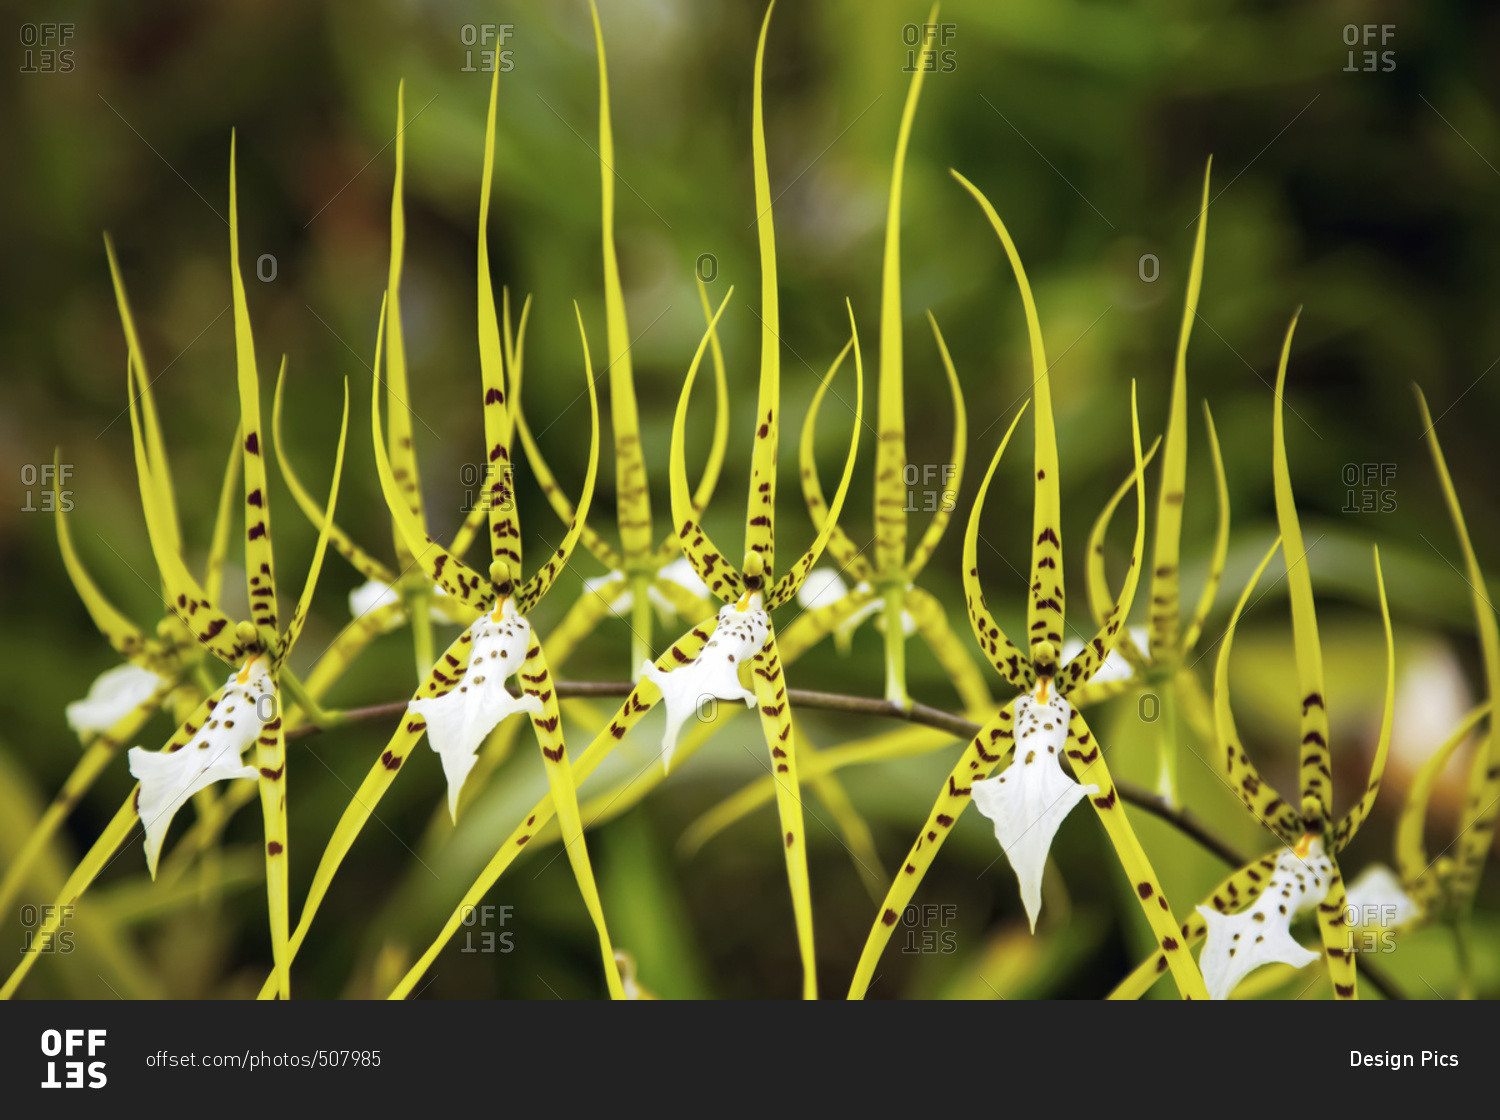 Close up view of yellow Spider Orchid blossoms, Landers, California, United States of America